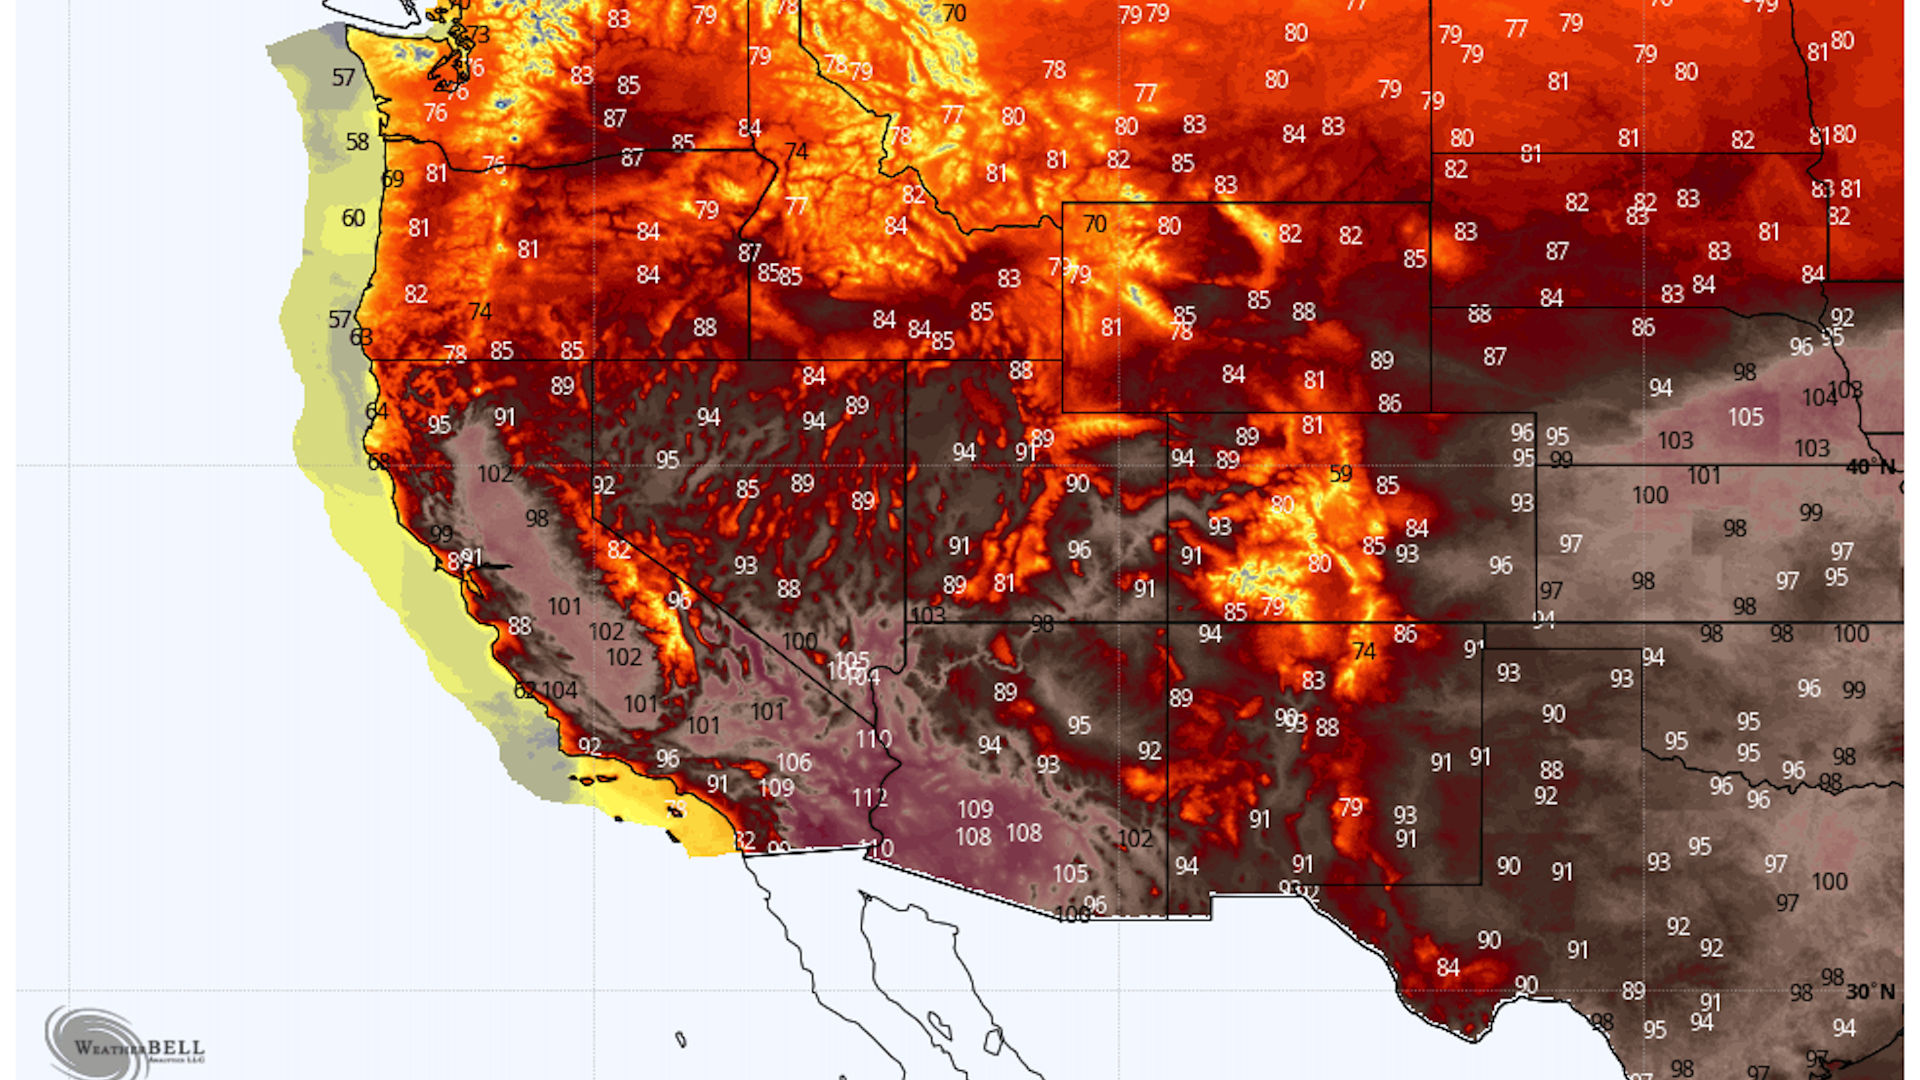 Map showing temperatures in the West, with colors corresponding to extreme heat.